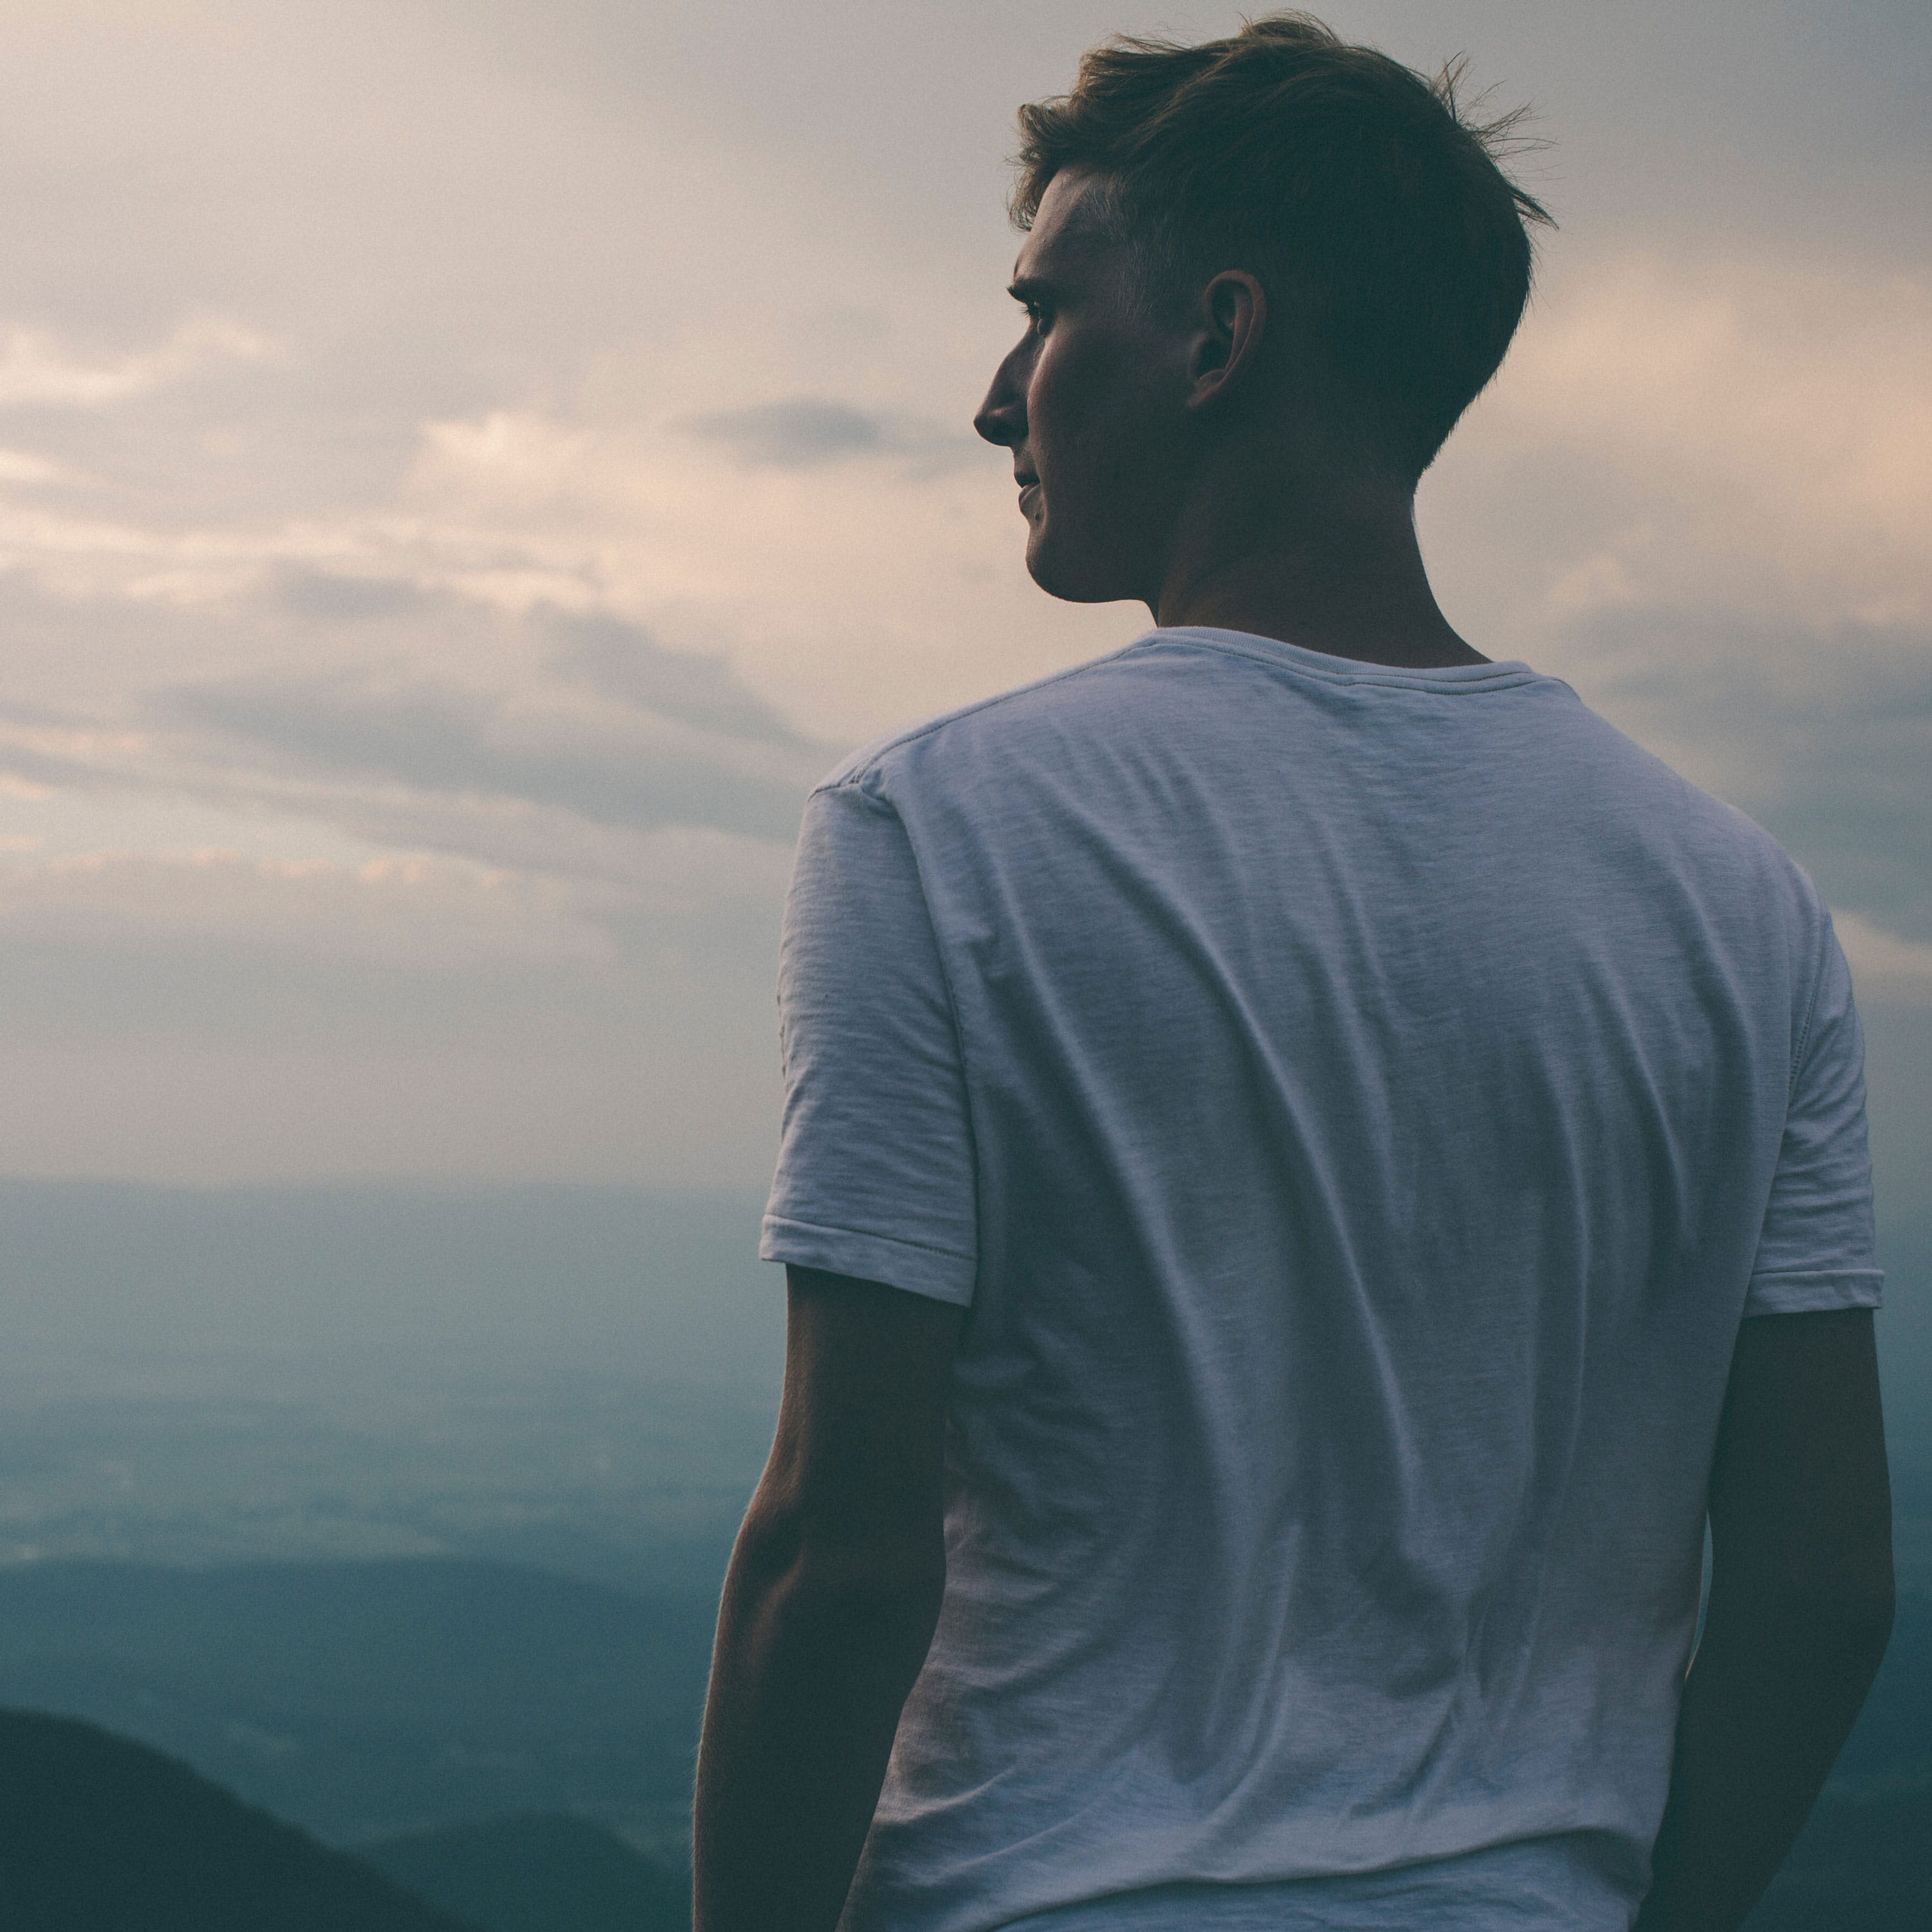 Man looking out onto scenic view